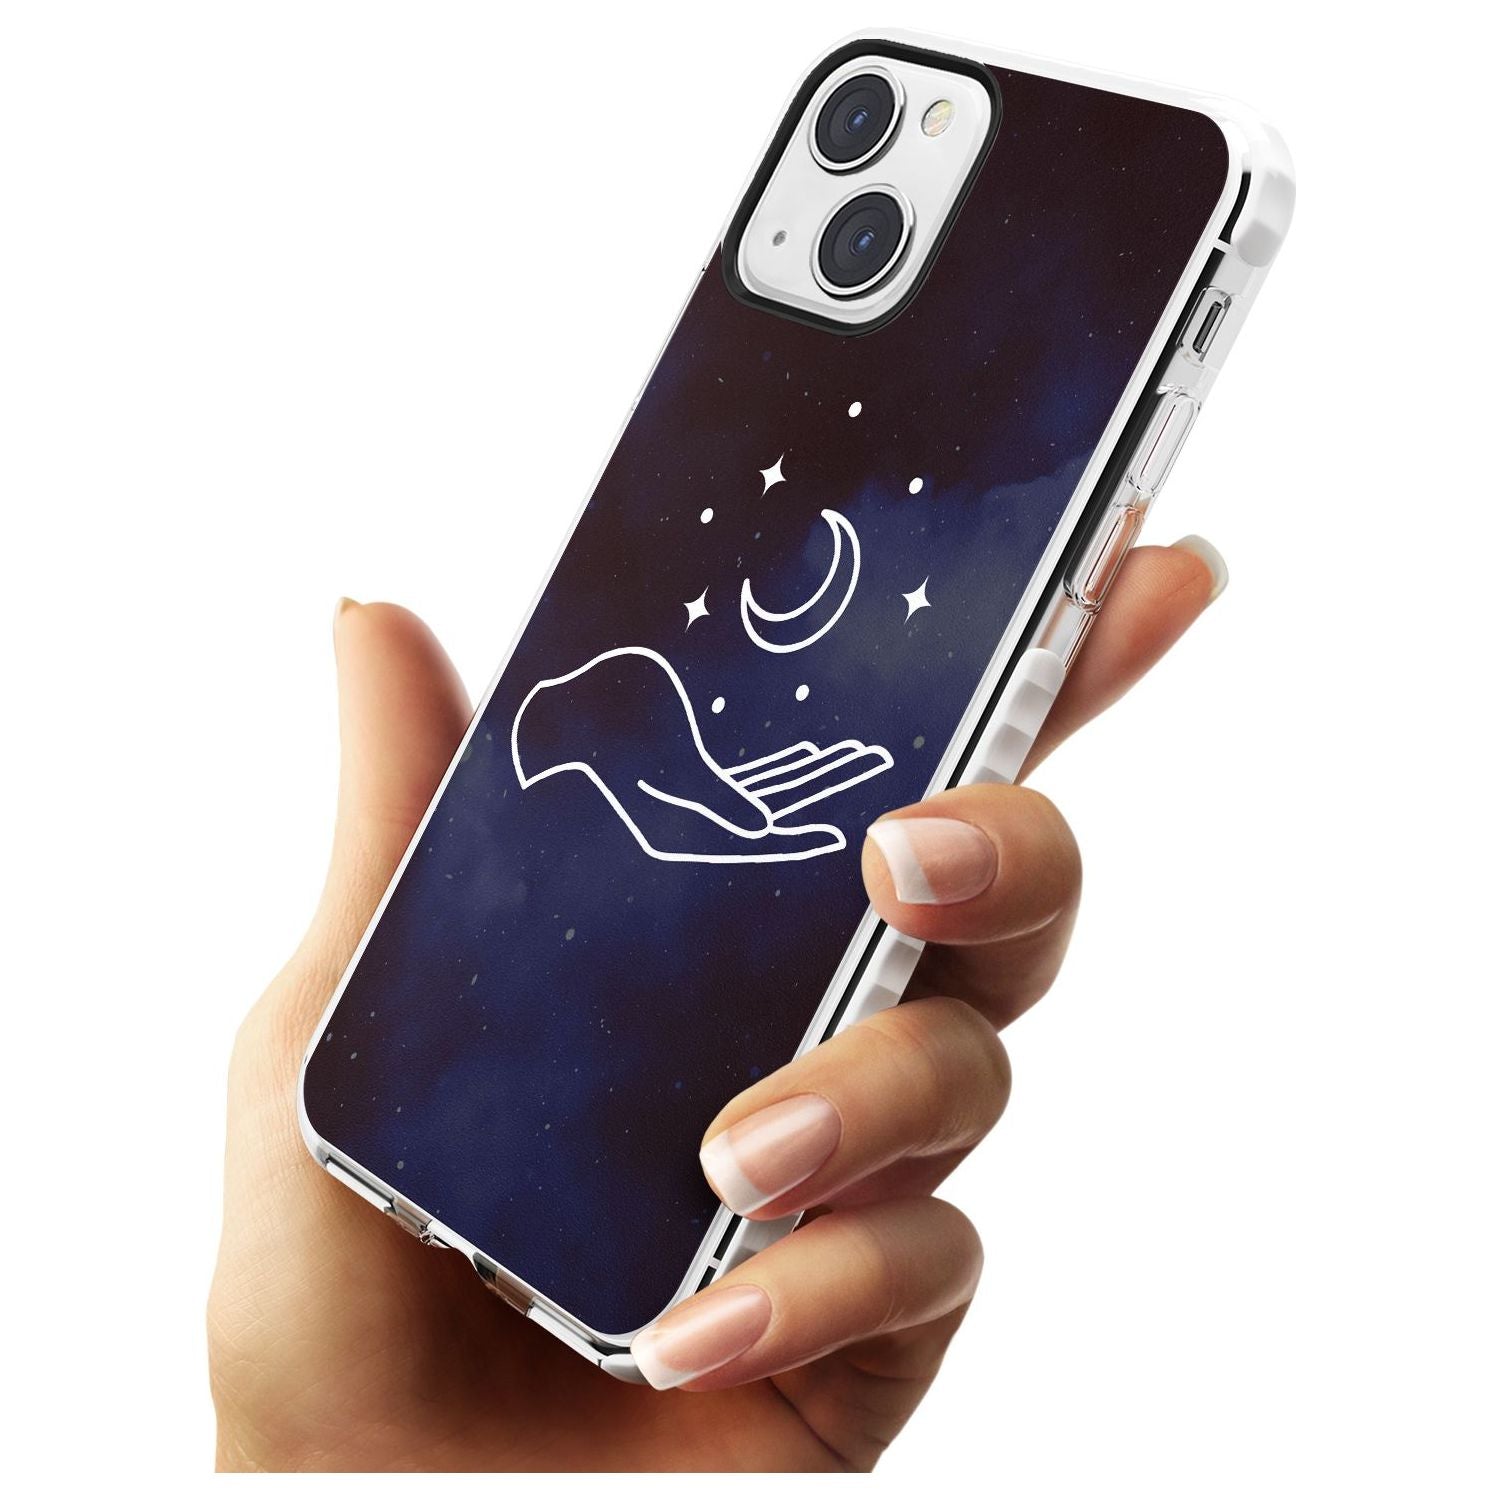 Floating Moon Above Hand Phone Case iPhone 15 Pro Max / Black Impact Case,iPhone 15 Plus / Black Impact Case,iPhone 15 Pro / Black Impact Case,iPhone 15 / Black Impact Case,iPhone 15 Pro Max / Impact Case,iPhone 15 Plus / Impact Case,iPhone 15 Pro / Impact Case,iPhone 15 / Impact Case,iPhone 15 Pro Max / Magsafe Black Impact Case,iPhone 15 Plus / Magsafe Black Impact Case,iPhone 15 Pro / Magsafe Black Impact Case,iPhone 15 / Magsafe Black Impact Case,iPhone 14 Pro Max / Black Impact Case,iPhone 14 Plus / Bl